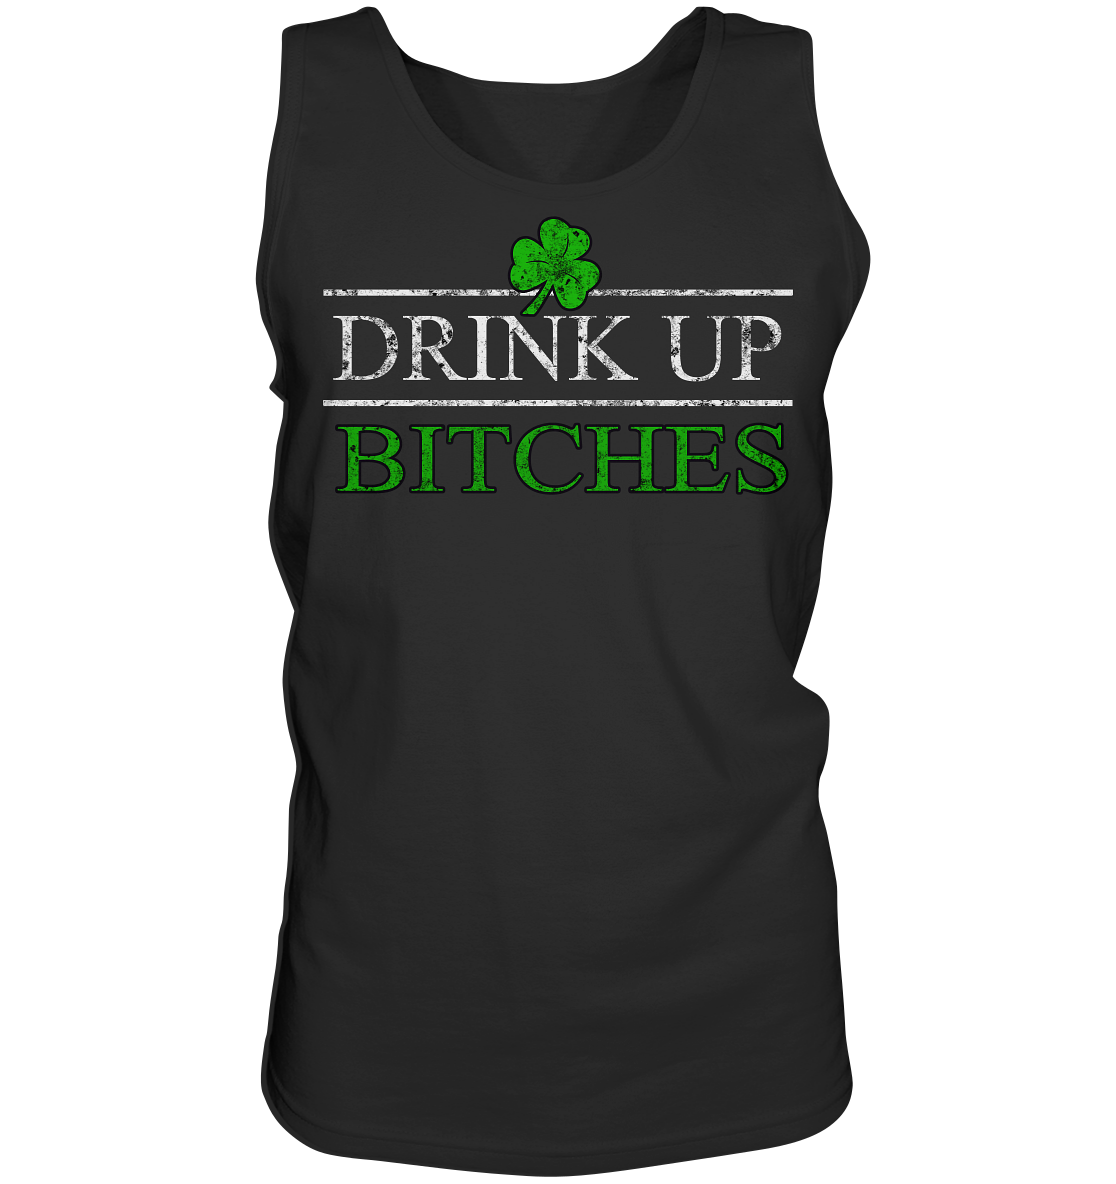 Drink Up "Bitches" - Tank-Top